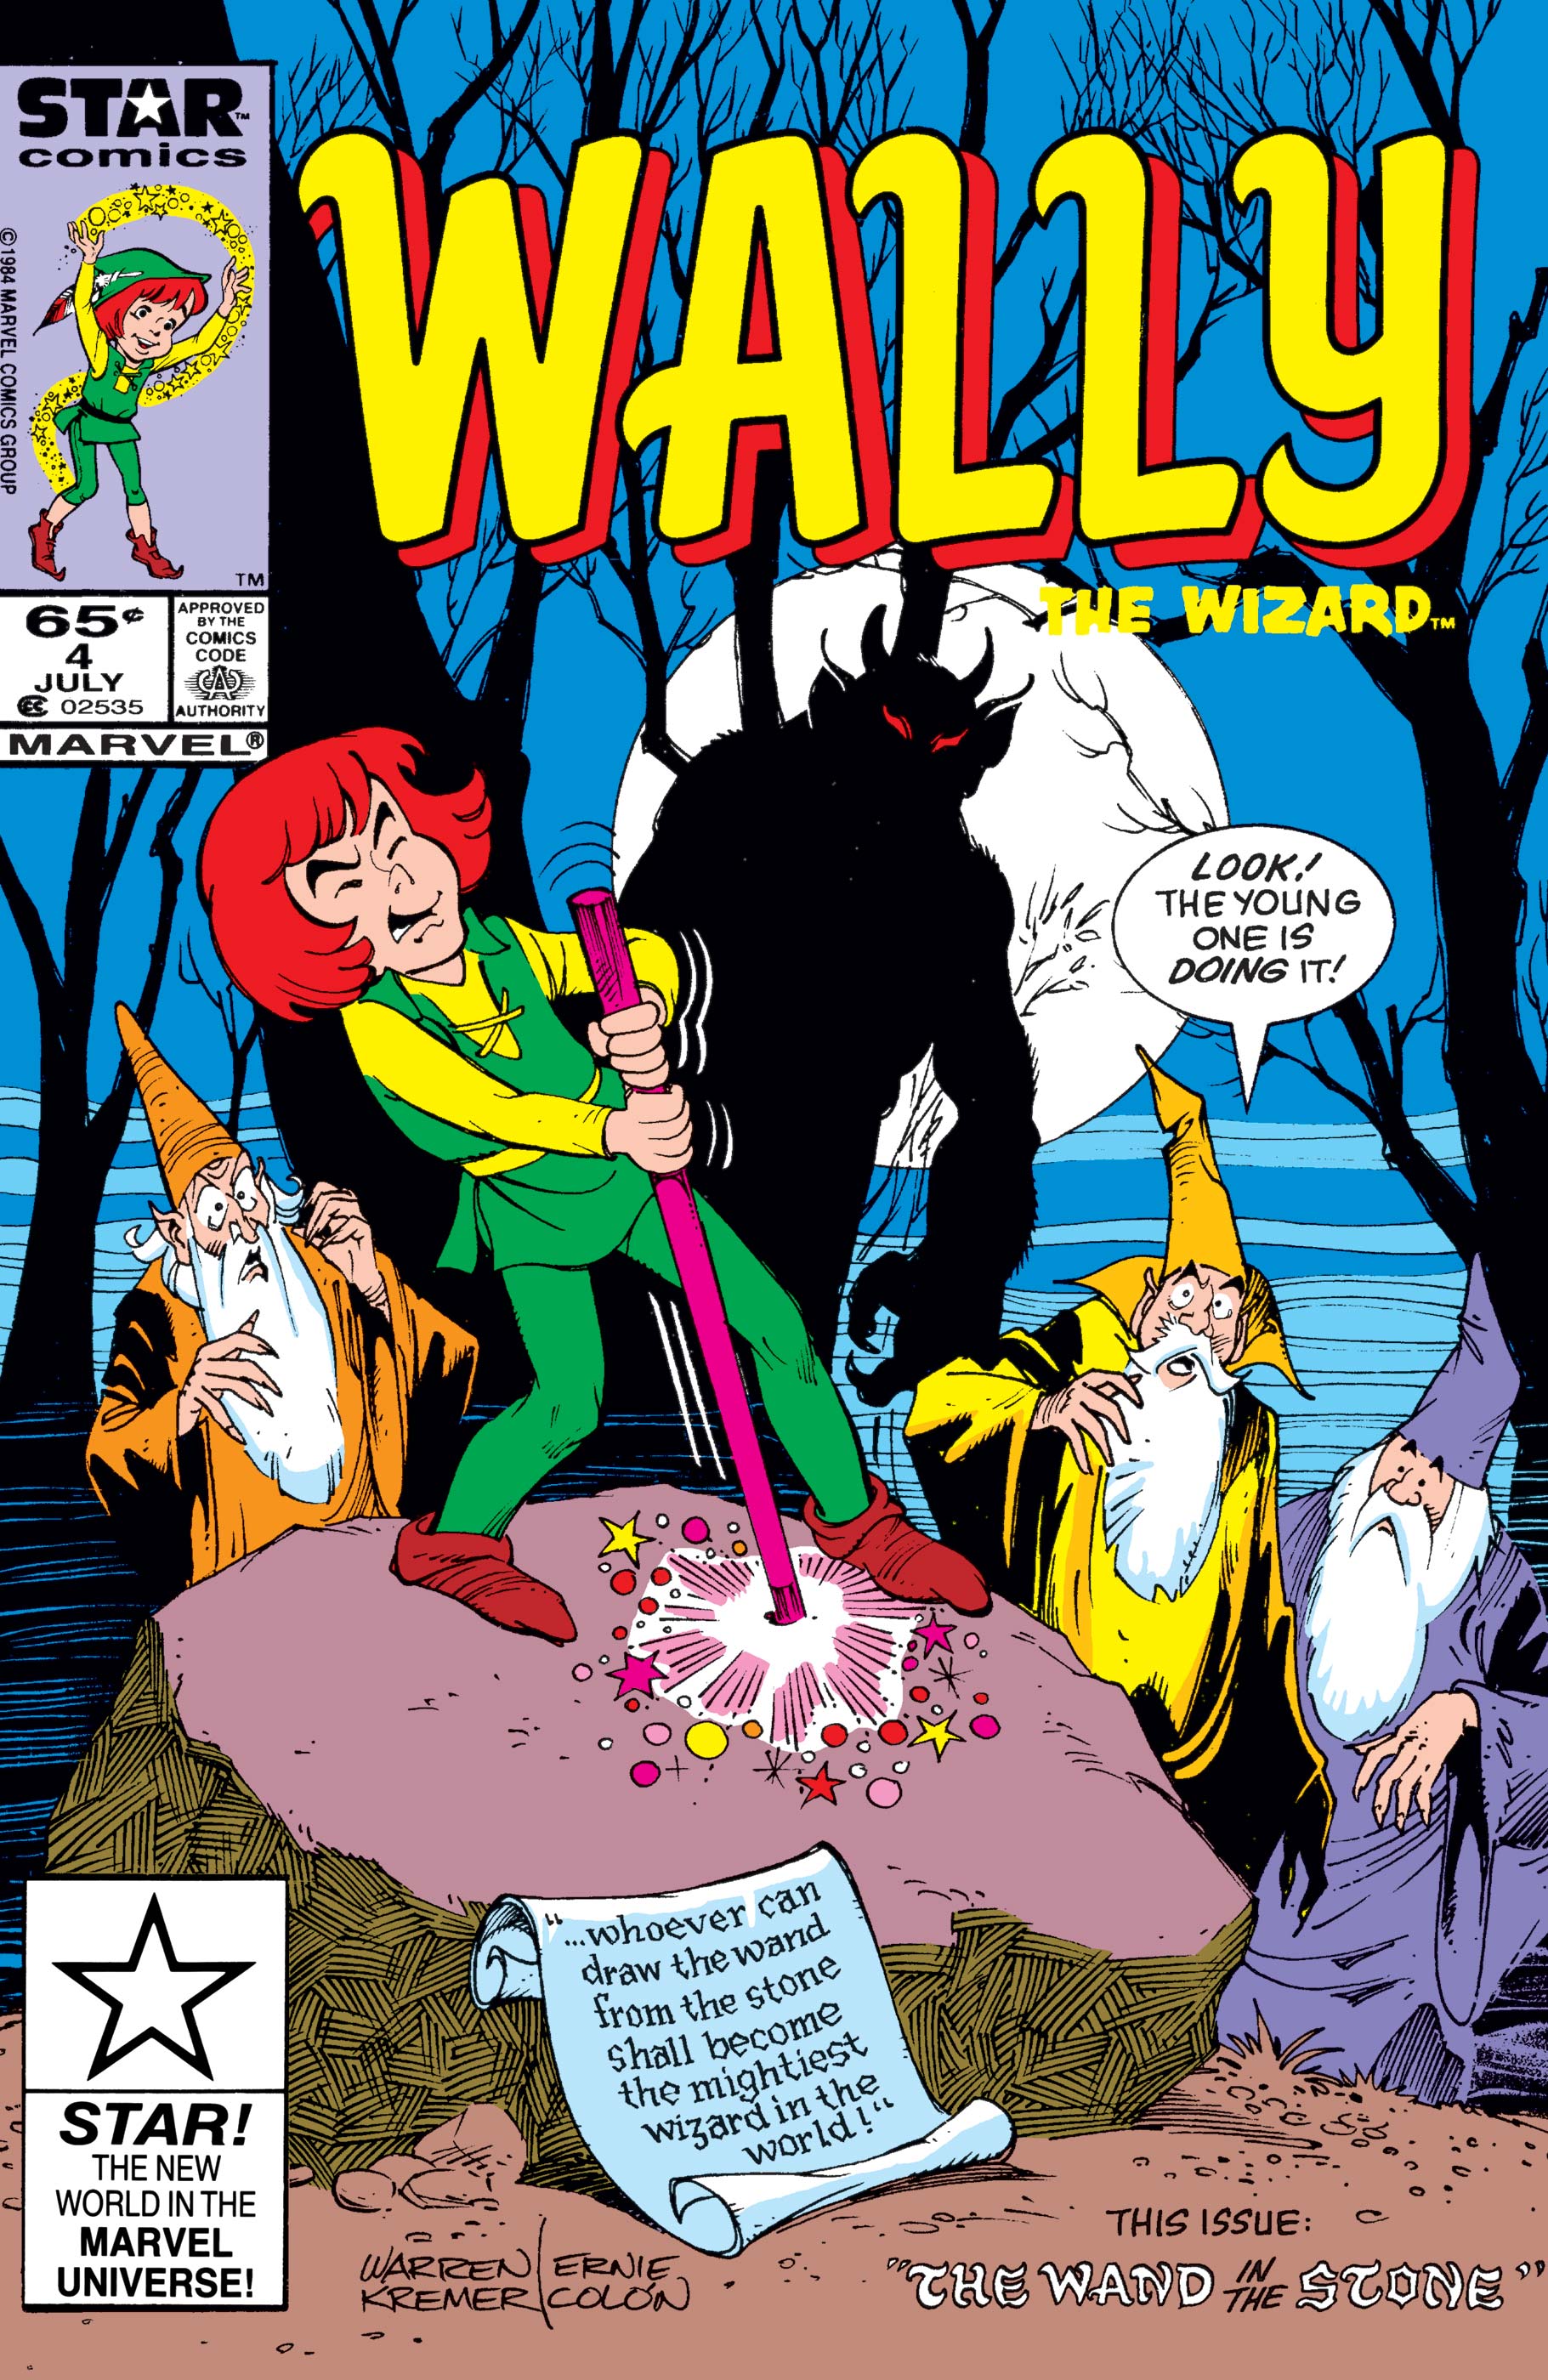 Wally the Wizard (1985) #4